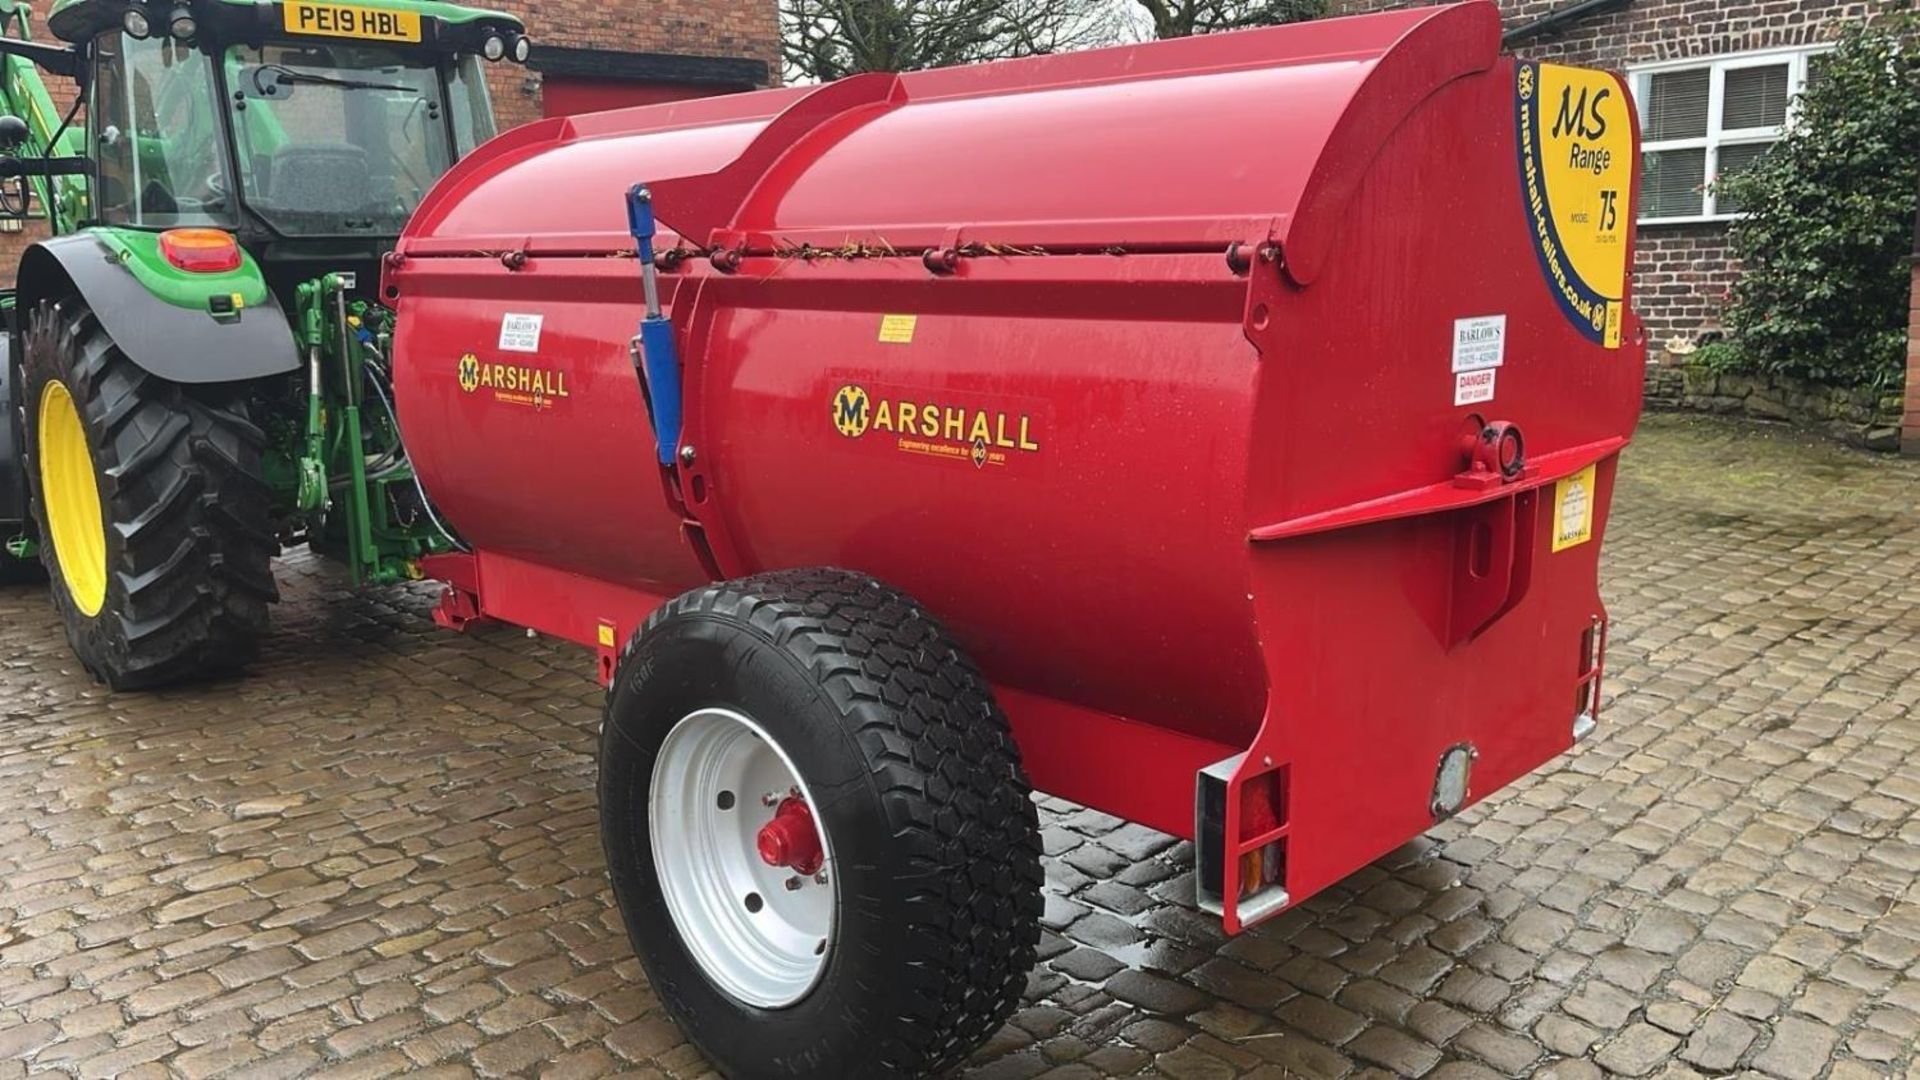 2016 MARSHALL MS 75 ROTARY MANURE SPREADER 7.5 CUBIC YARDS CARRYING CAPACITY 5 TONNE SERIAL NUMBER - Image 5 of 13